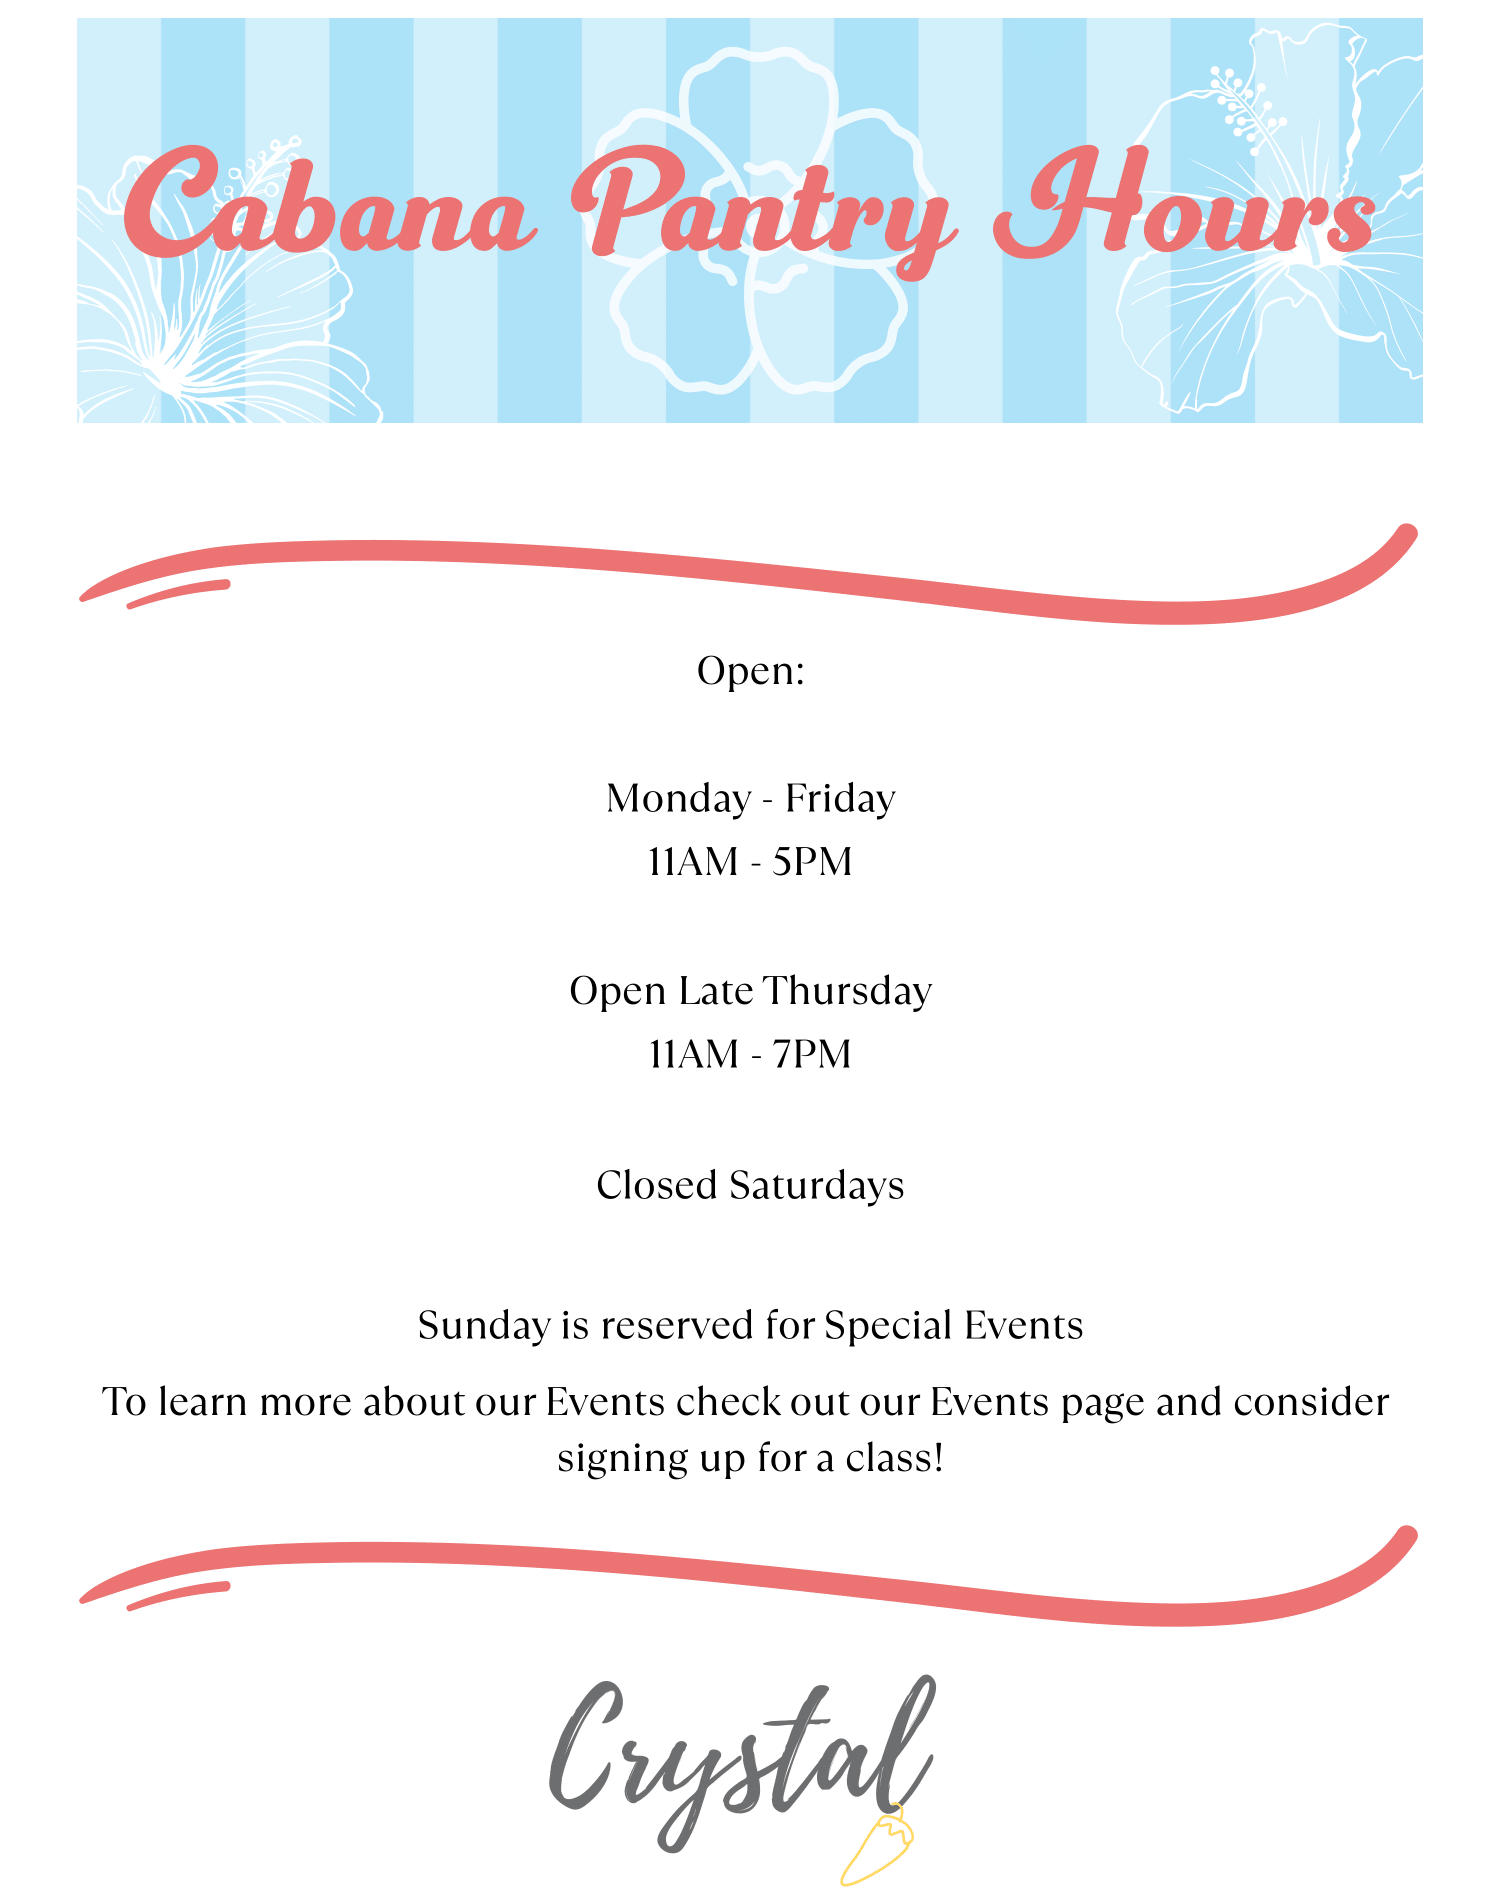 Cabana Pantry Hours, Open:  Monday - Friday 11AM - 5PM  Open Late Thursday 11AM - 7PM  Closed Saturdays  Sunday is reserved for Special Events To learn more about our Events check out our Events page and consider signing up for a class!